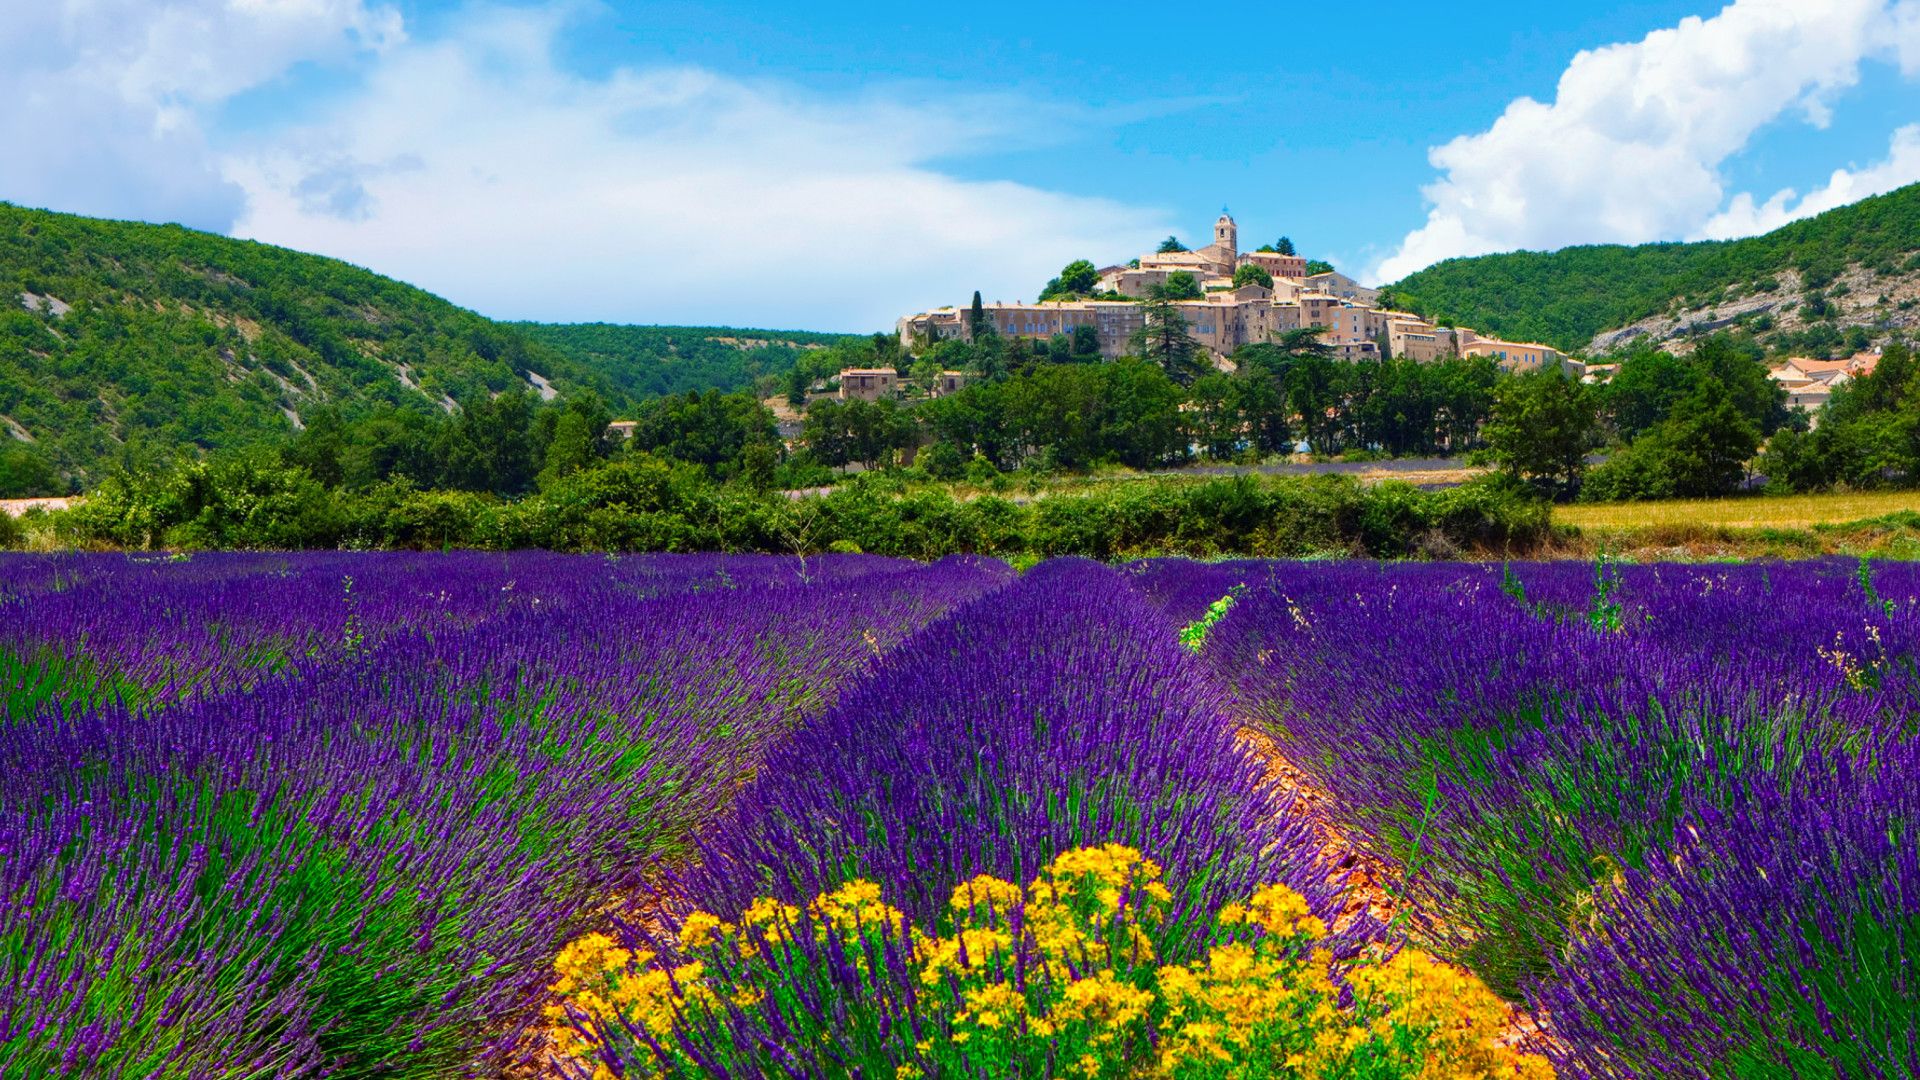 1920x1080, Lavender Field In Provence France Wallpapers